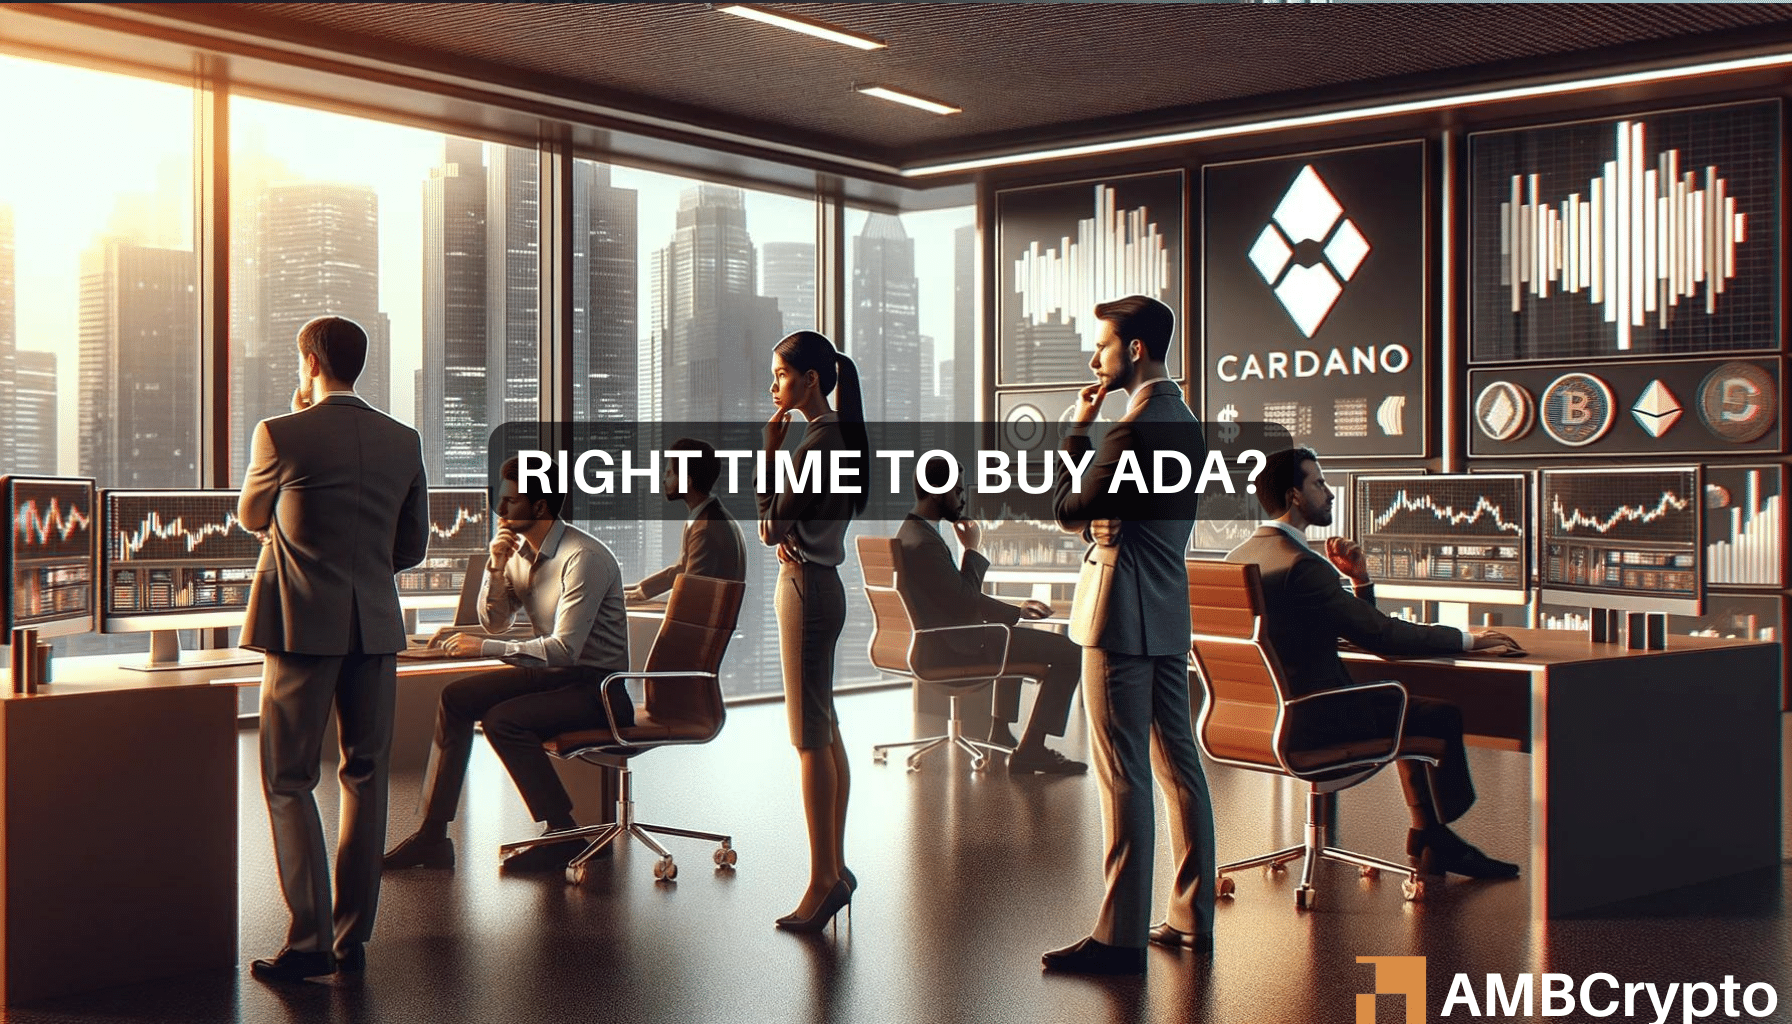 Cardano: As ADA falls 25% in 30 days, is this the perfect time to buy?